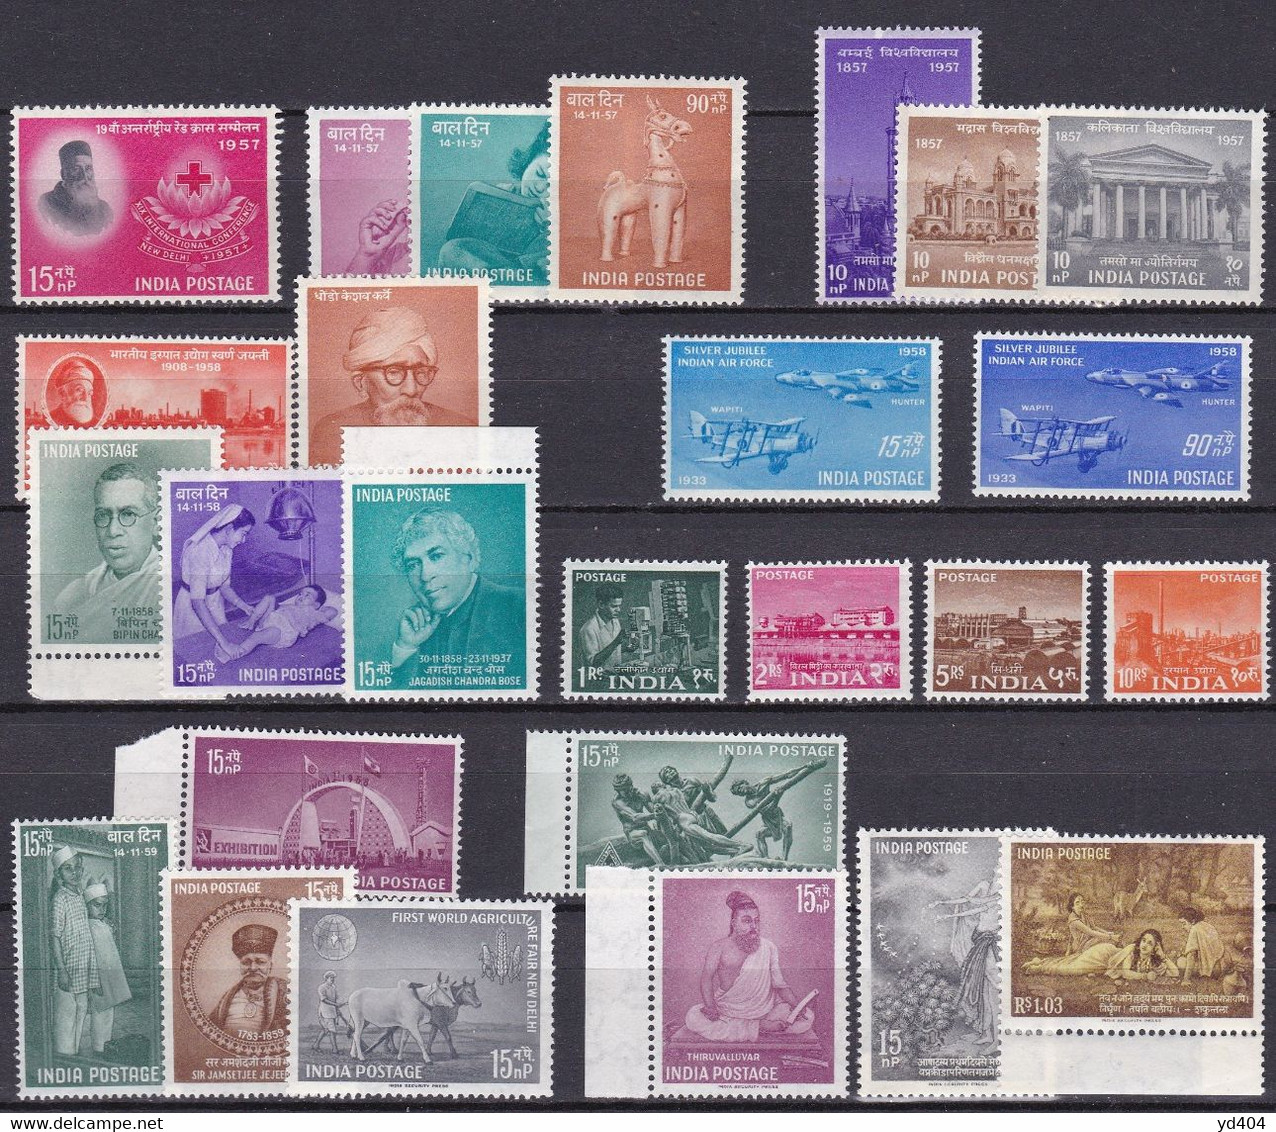 IN107- INDIA – INDE – 1957-60 – MNH ISSUES - MI # 275→314 - CV 102 € - Nuevos